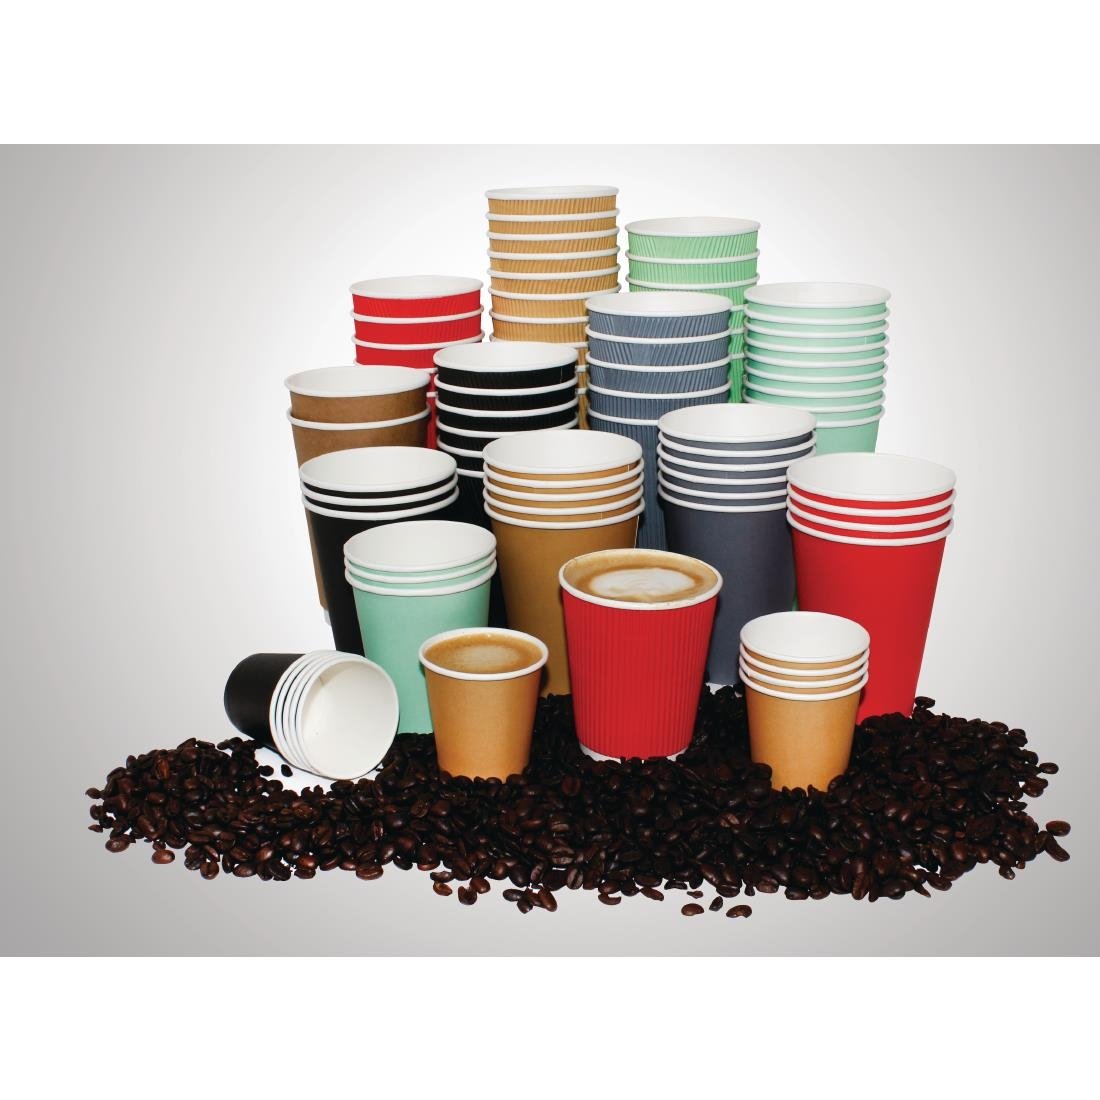 Fiesta Ripple Wall Takeaway Coffee Cups Red 225ml / 8oz (Pack of 25) JD Catering Equipment Solutions Ltd